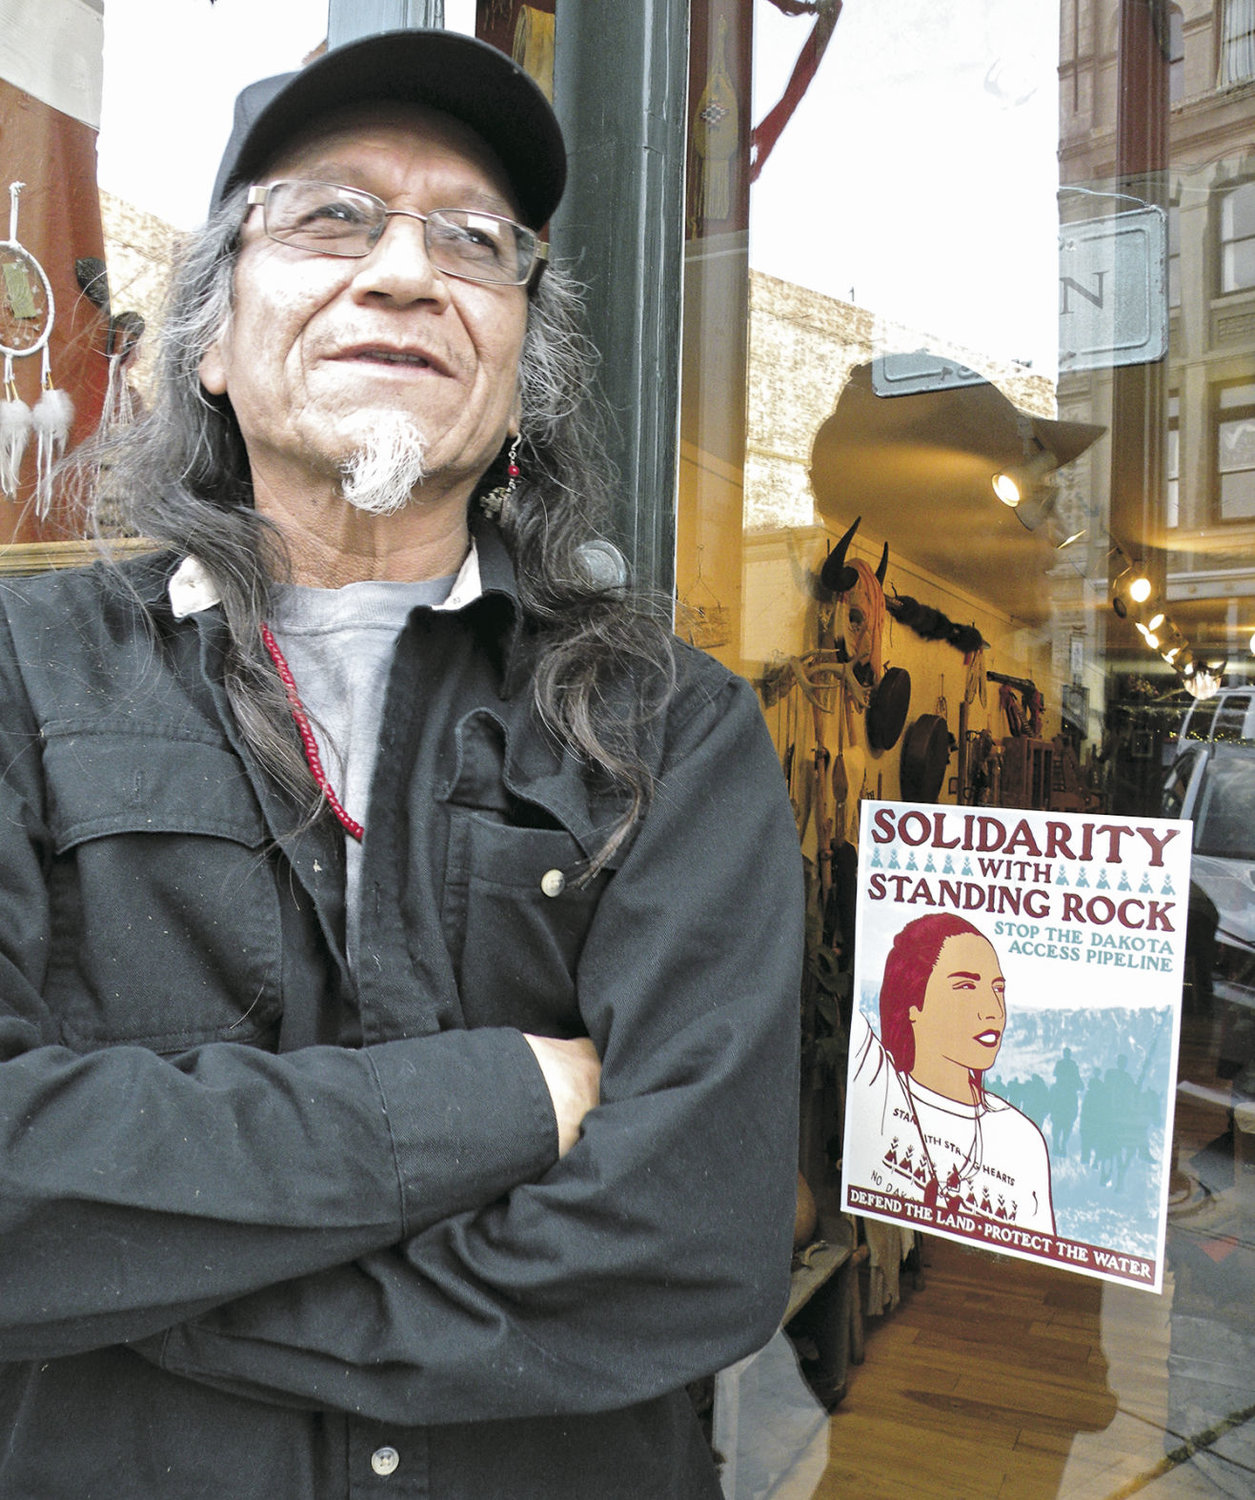 Gary Buckman of Big Wolf Trading Co. stands outside his shop on Taylor Street in downtown Port Townsend. He closed the shop for two weeks in October to be part of the Standing Rock gathering in North Dakota. Quimper Unitarian Universalist Fellowship helped him financially. If necessary, he said he and his wife, Hannah, would make the trip again. Photo by Allison Arthur